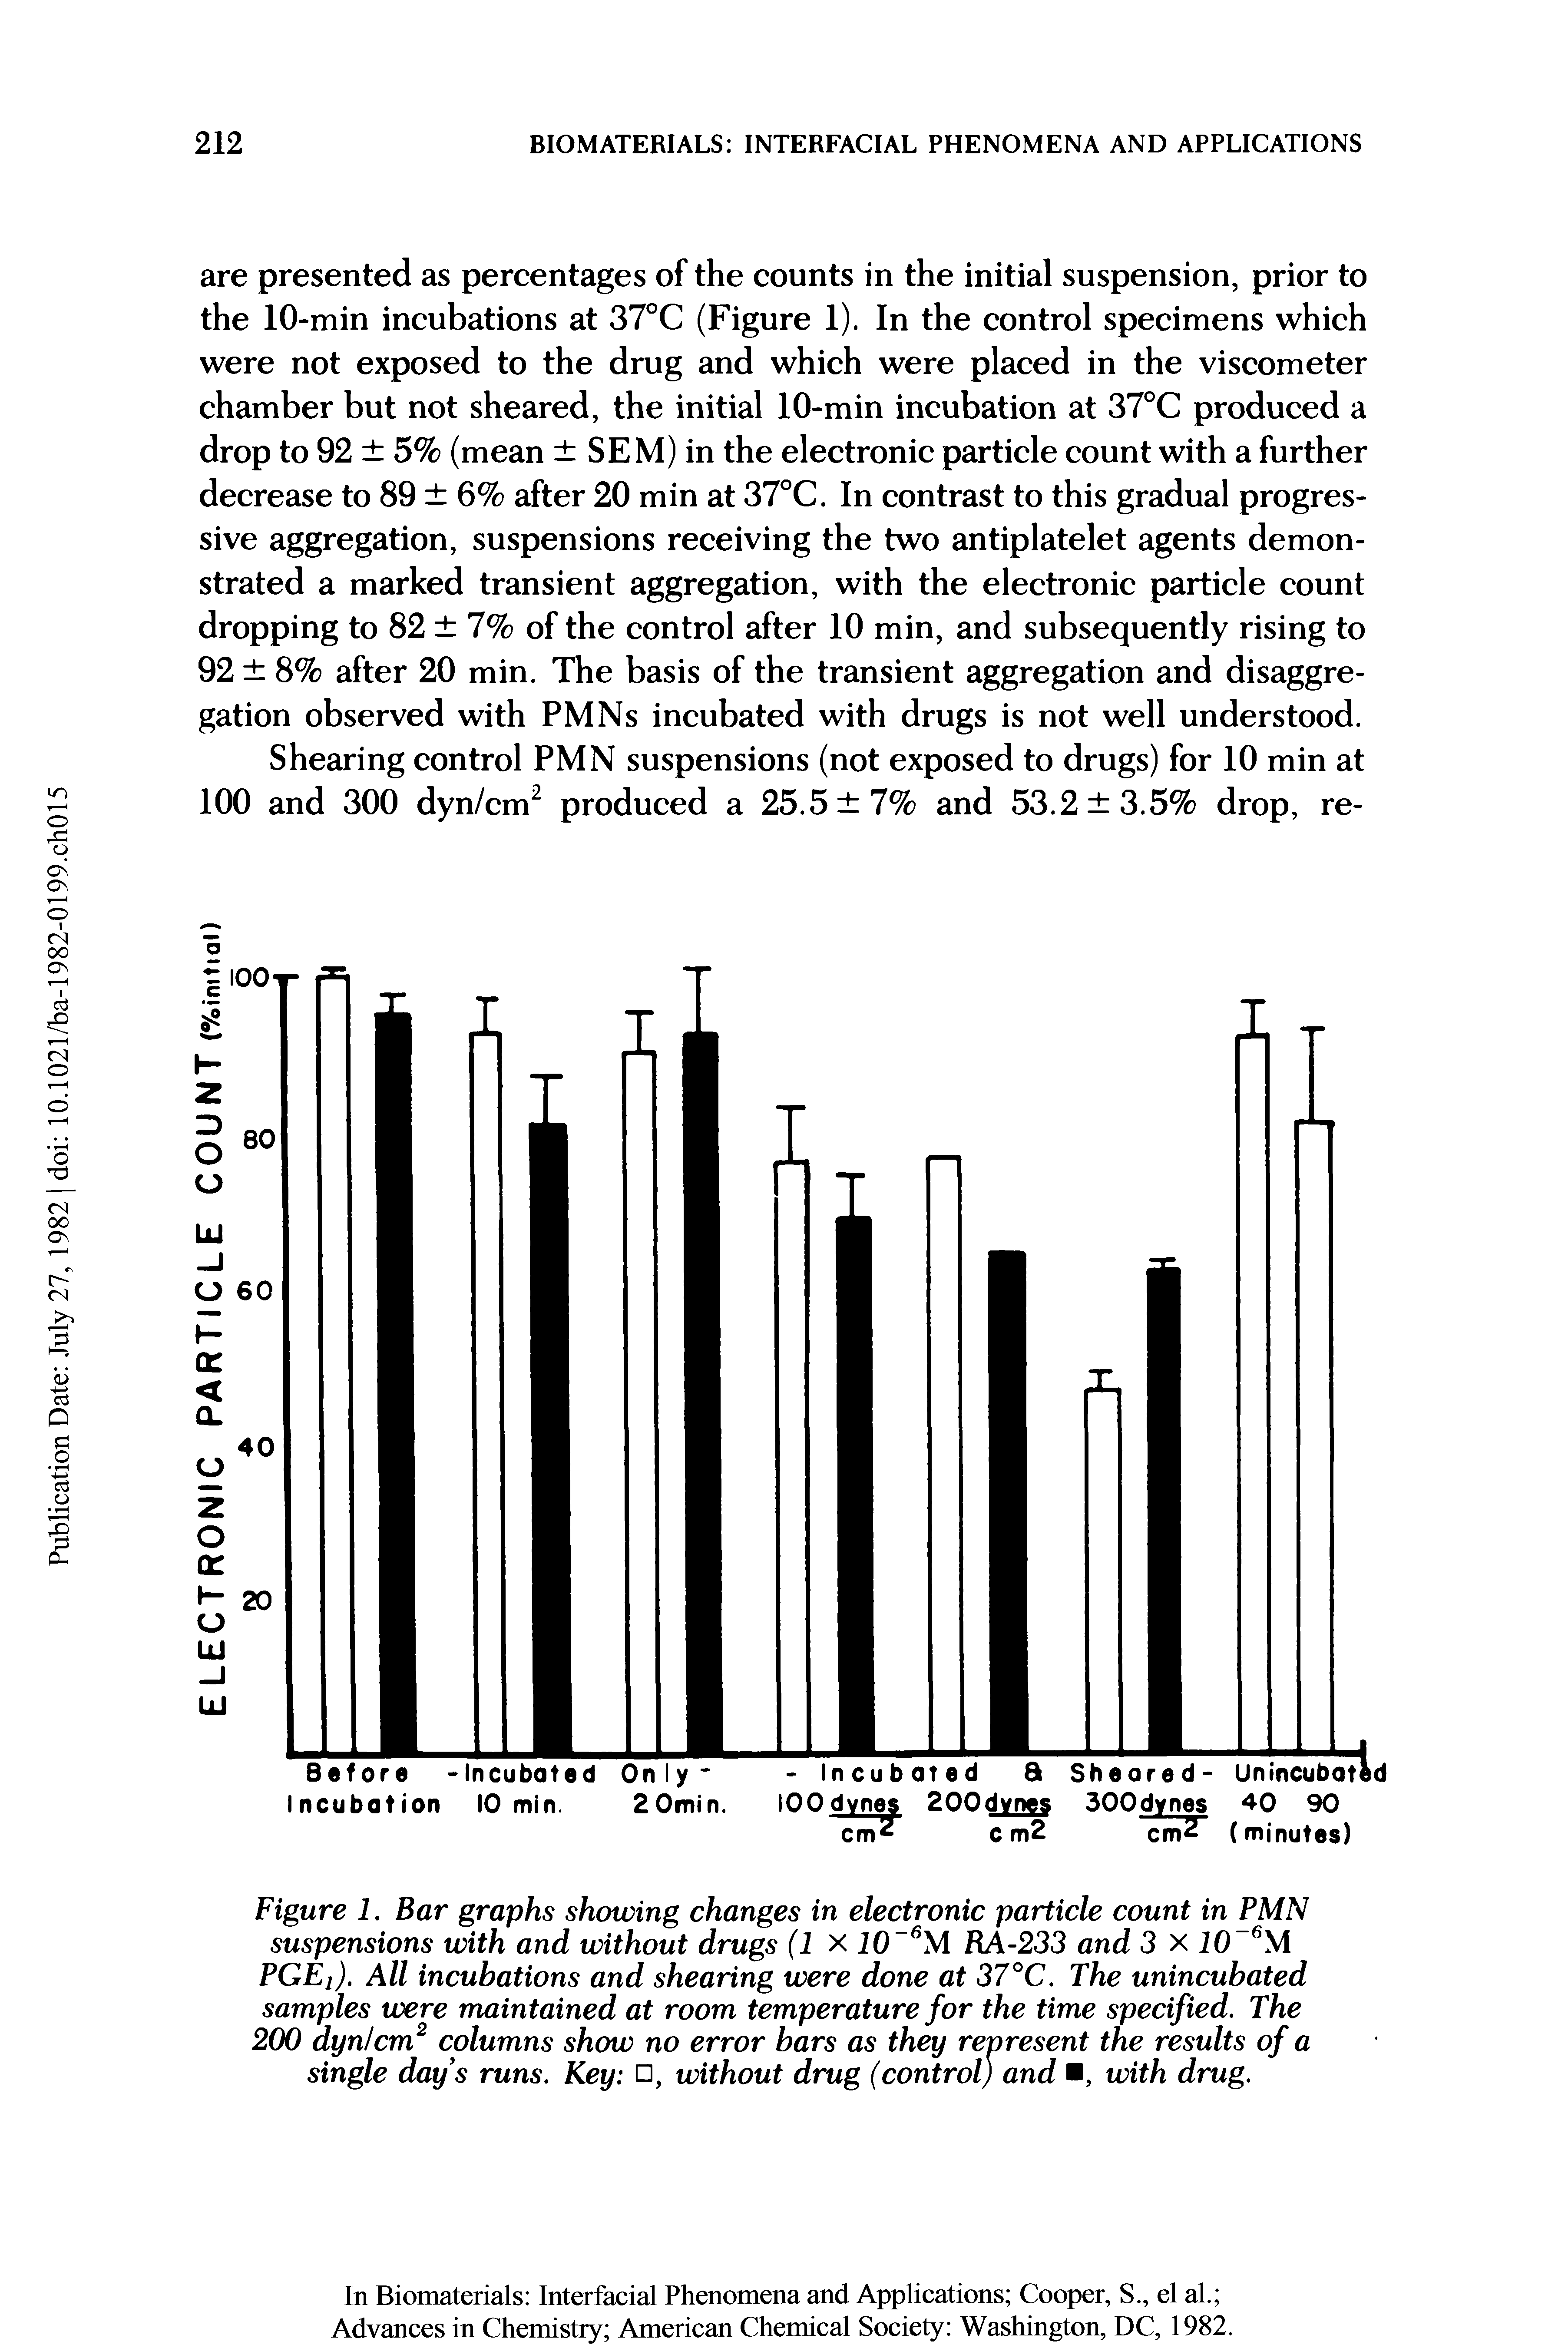 Figure 1. Bar graphs showing changes in electronic particle count in PMN suspensions with and without drugs (1 x 10-6M RA-233 and 3 x 10 6M PGE, ). All incubations and shearing were done at 37°C. The unincubated samples were maintained at room temperature for the time specified. The 200 dyn/cm2 columns show no error bars as they represent the results of a single day s runs. Key , without drug (control) and , with drug.